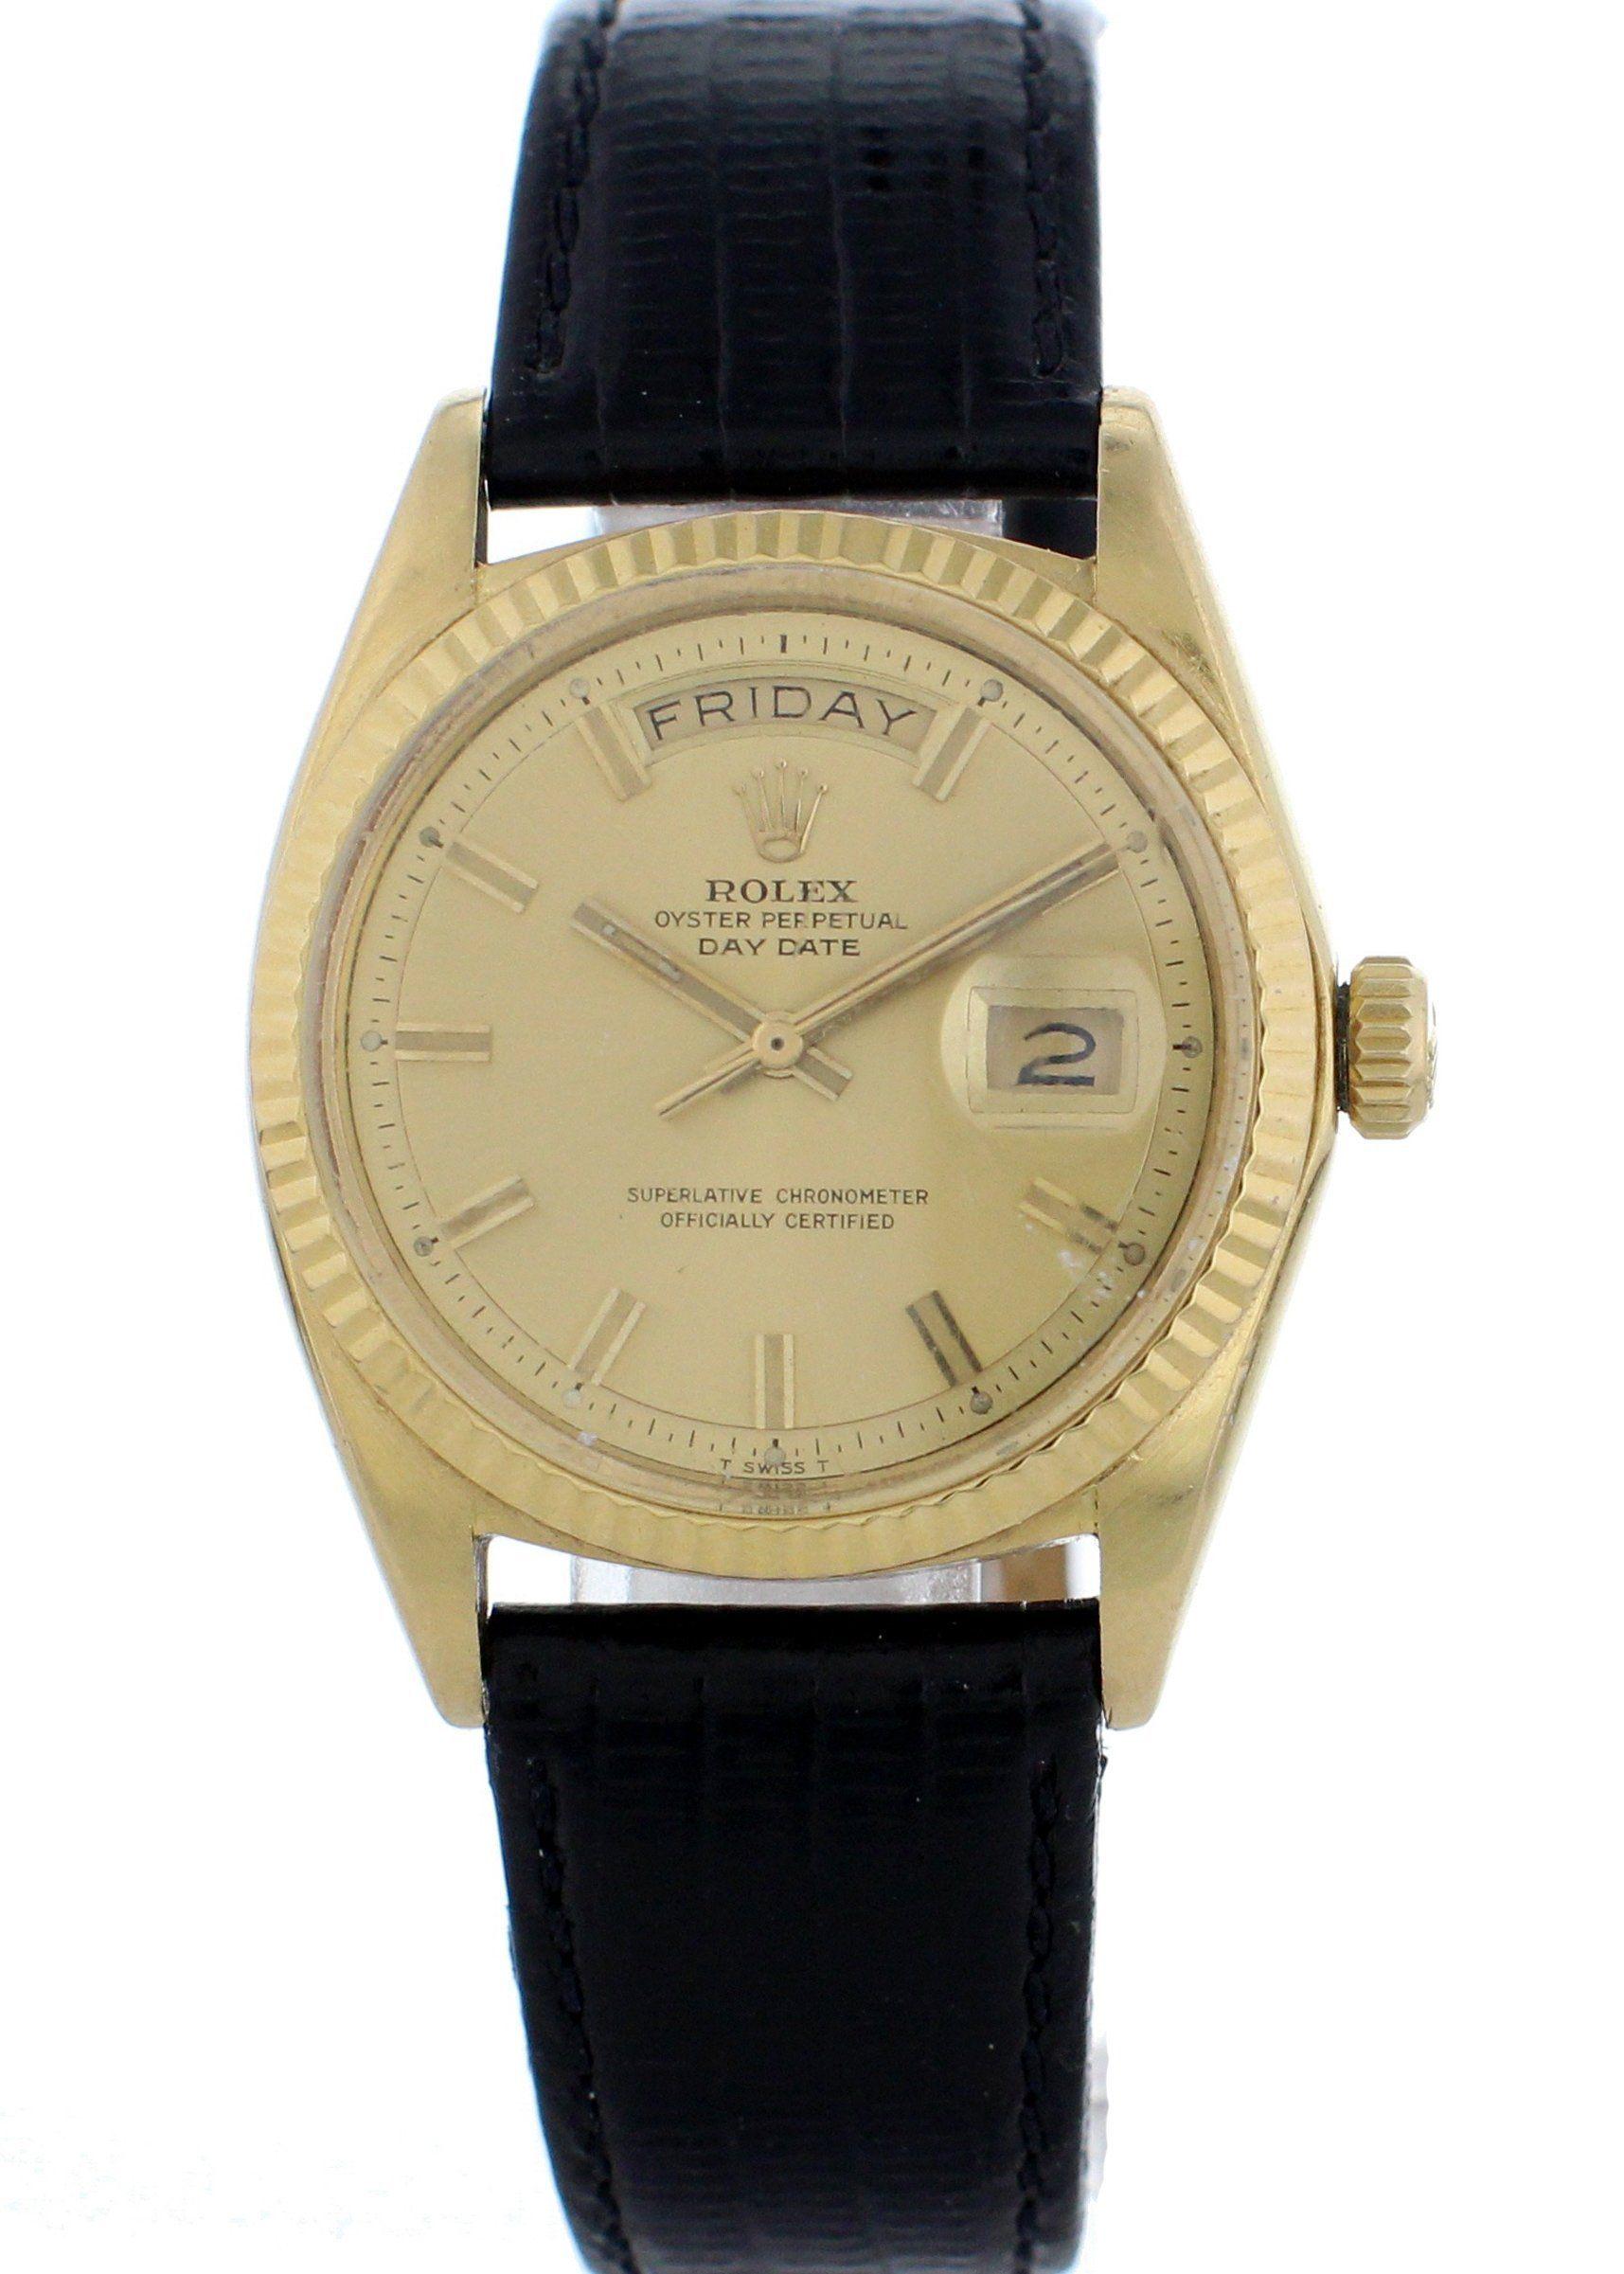 Vintage Rolex Oyster Perpetual Day-Date President 1803. 18K Yellow gold 36mm case with a yellow gold fluted bezel. Champagne dial with gold hands and stick markers. Day and date aperture. Black crocodile grain calfskin strap. Caliber 1556 automatic